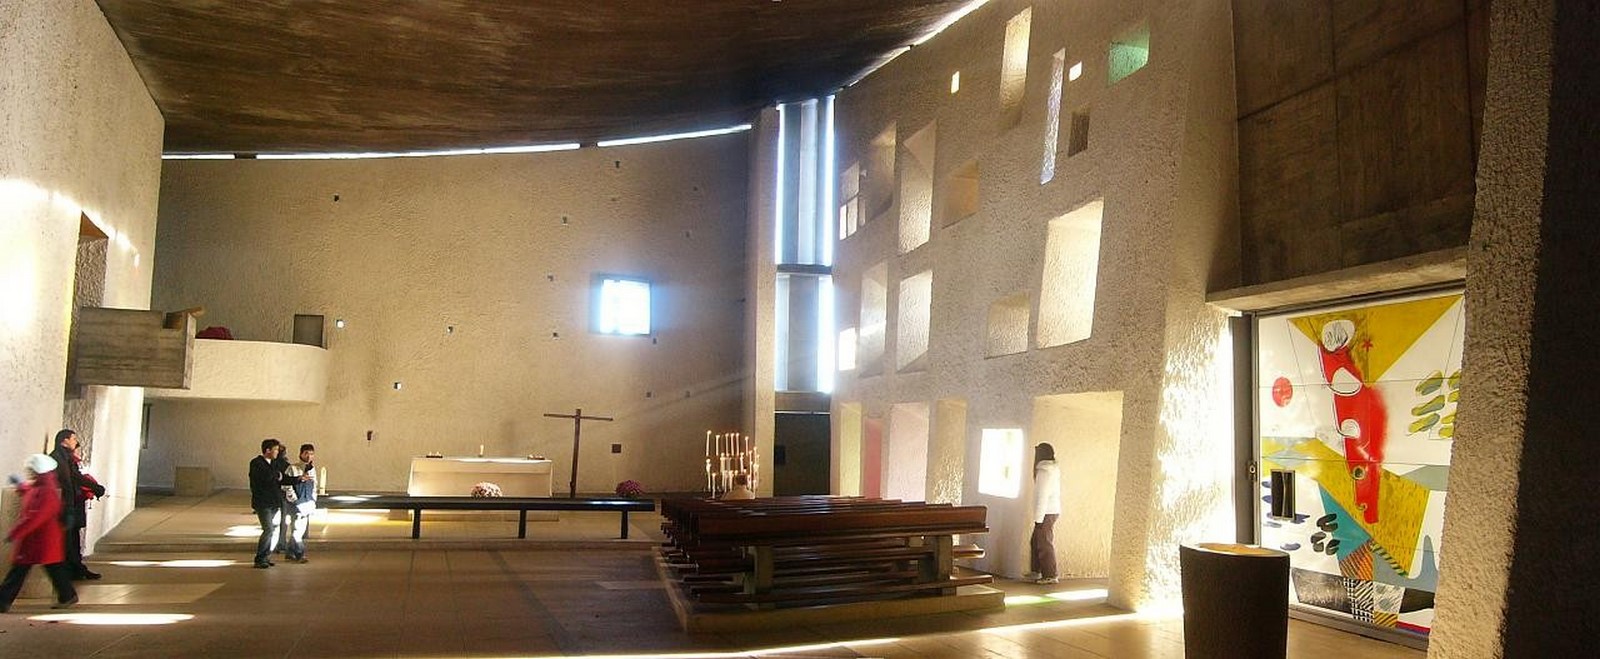 Notre Dame du Haut, France by Le Corbusier: The first Post-Modern building - Sheet6